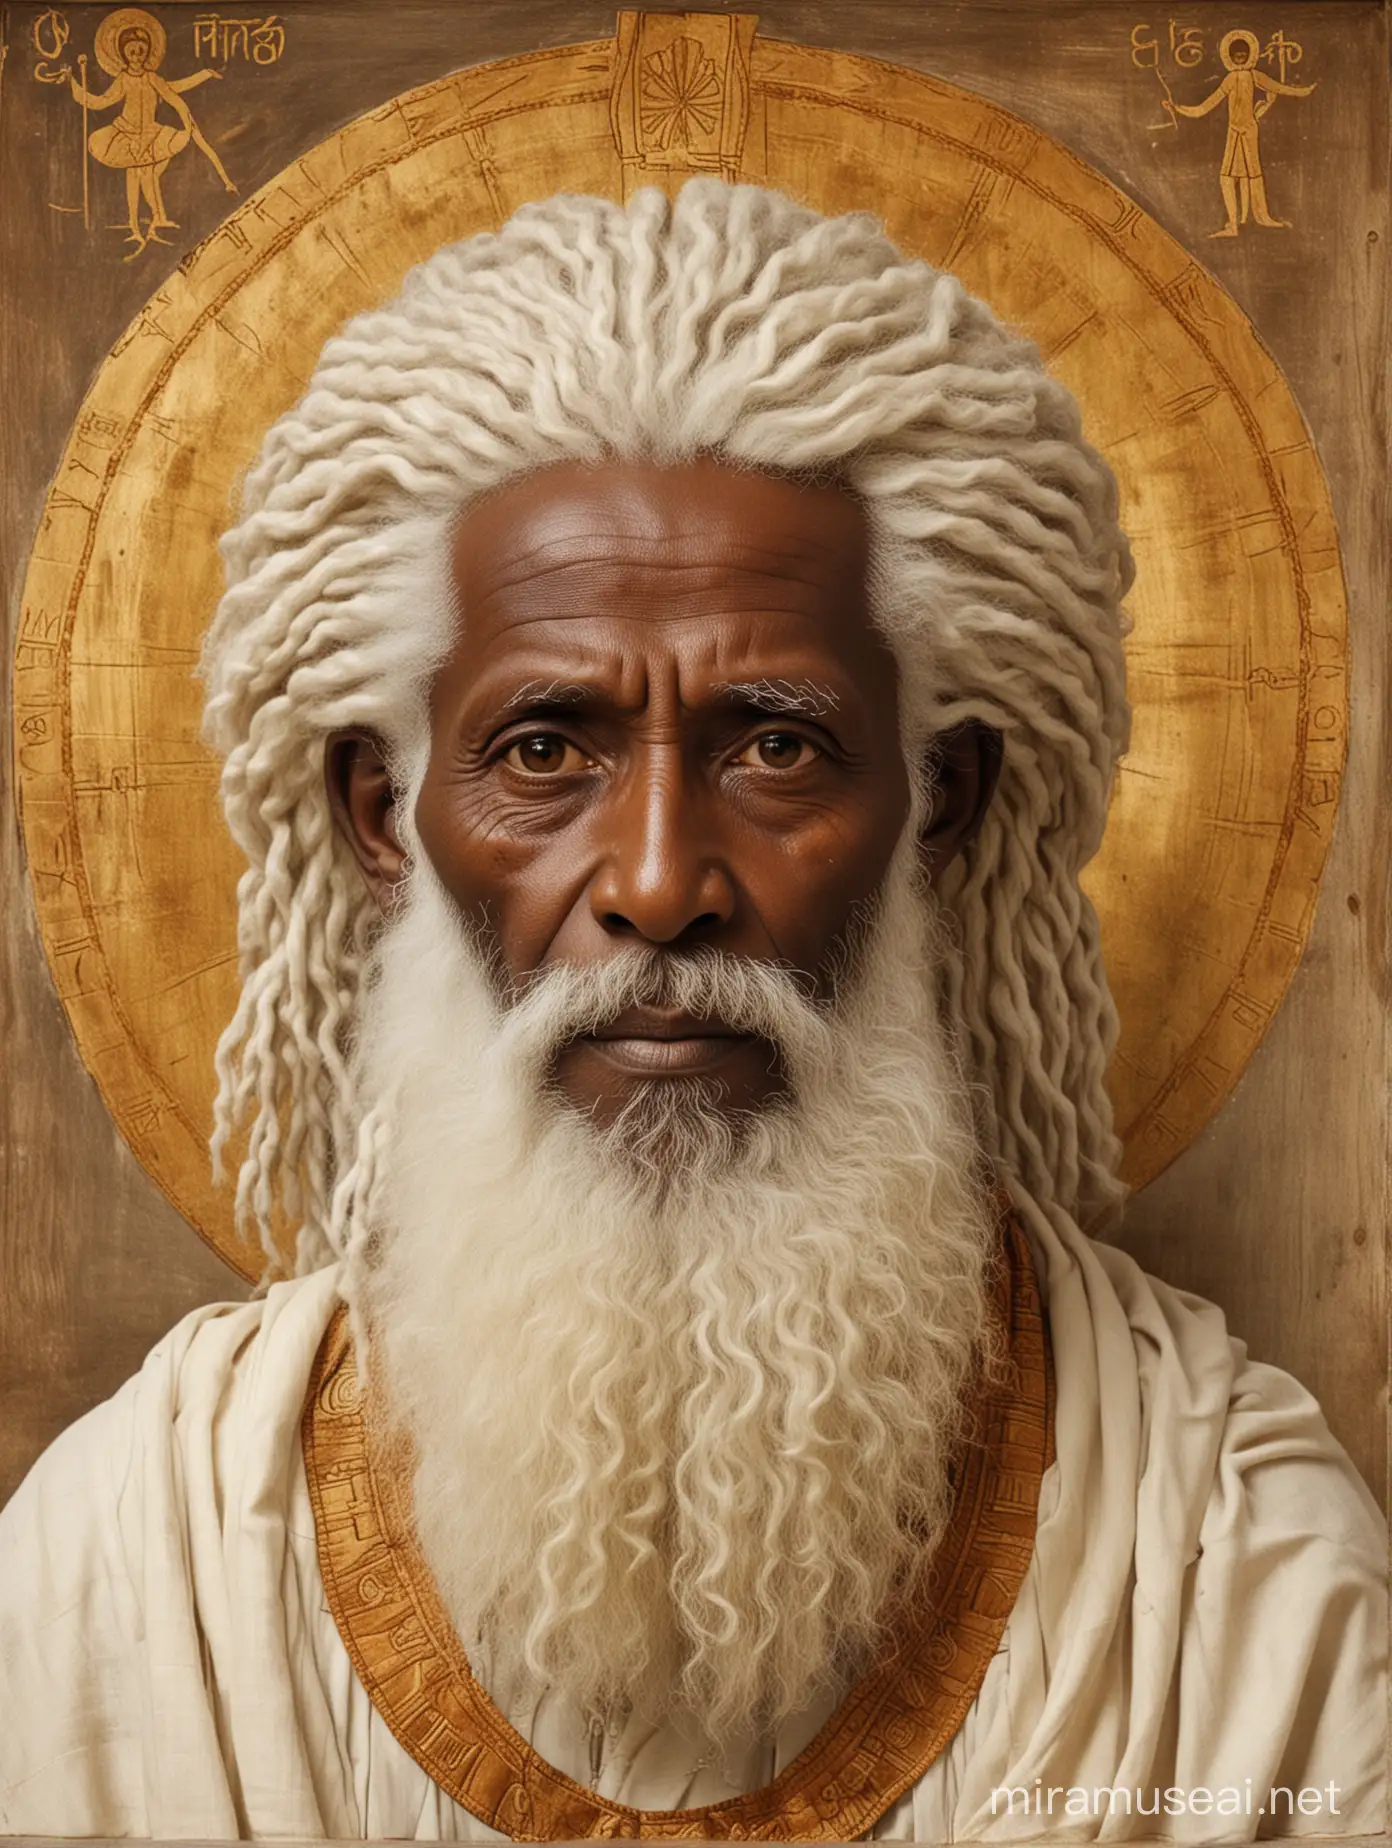 An old wise deity, hair is white as wool, ethiopia, ethiopian, icon, orthodox icon, gods, divinities, in a celestial abode, in paradise, the trinity, ancient one, great one